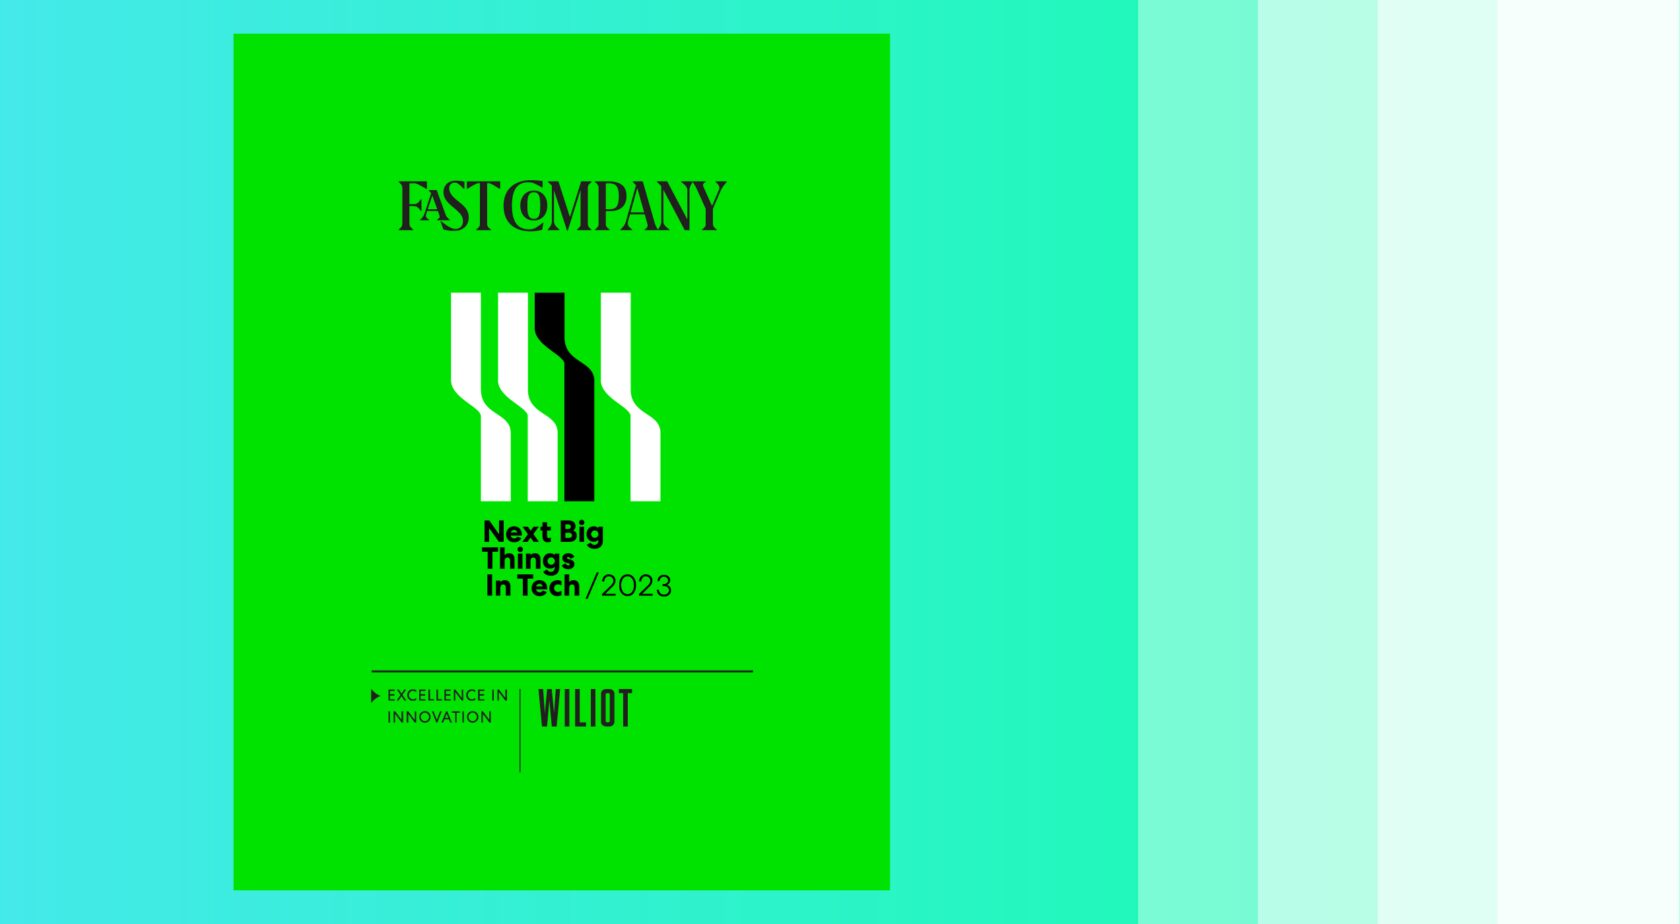 Wiliot Named to Fast Company’s Third Annual List of the Next Big Things in Tech